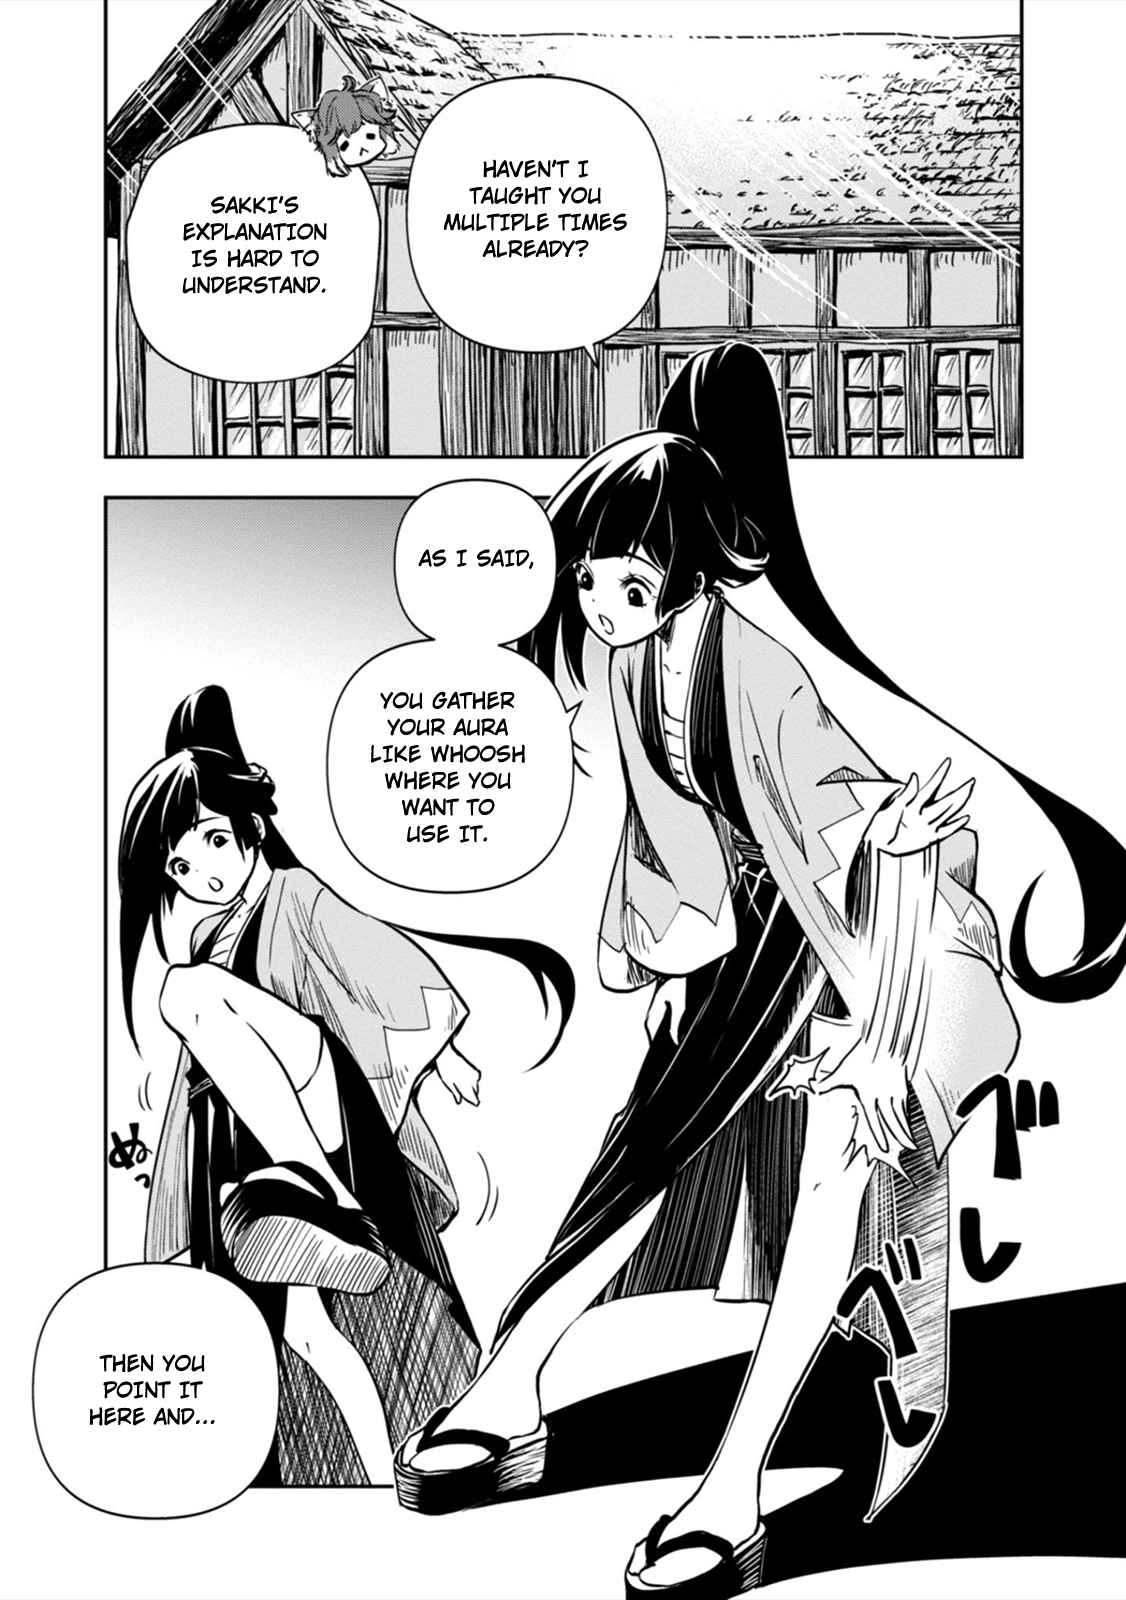 Is It Odd That I Became An Adventurer Even If I Graduated The Witchcraft Institute? Vol. 1 Ch. 2